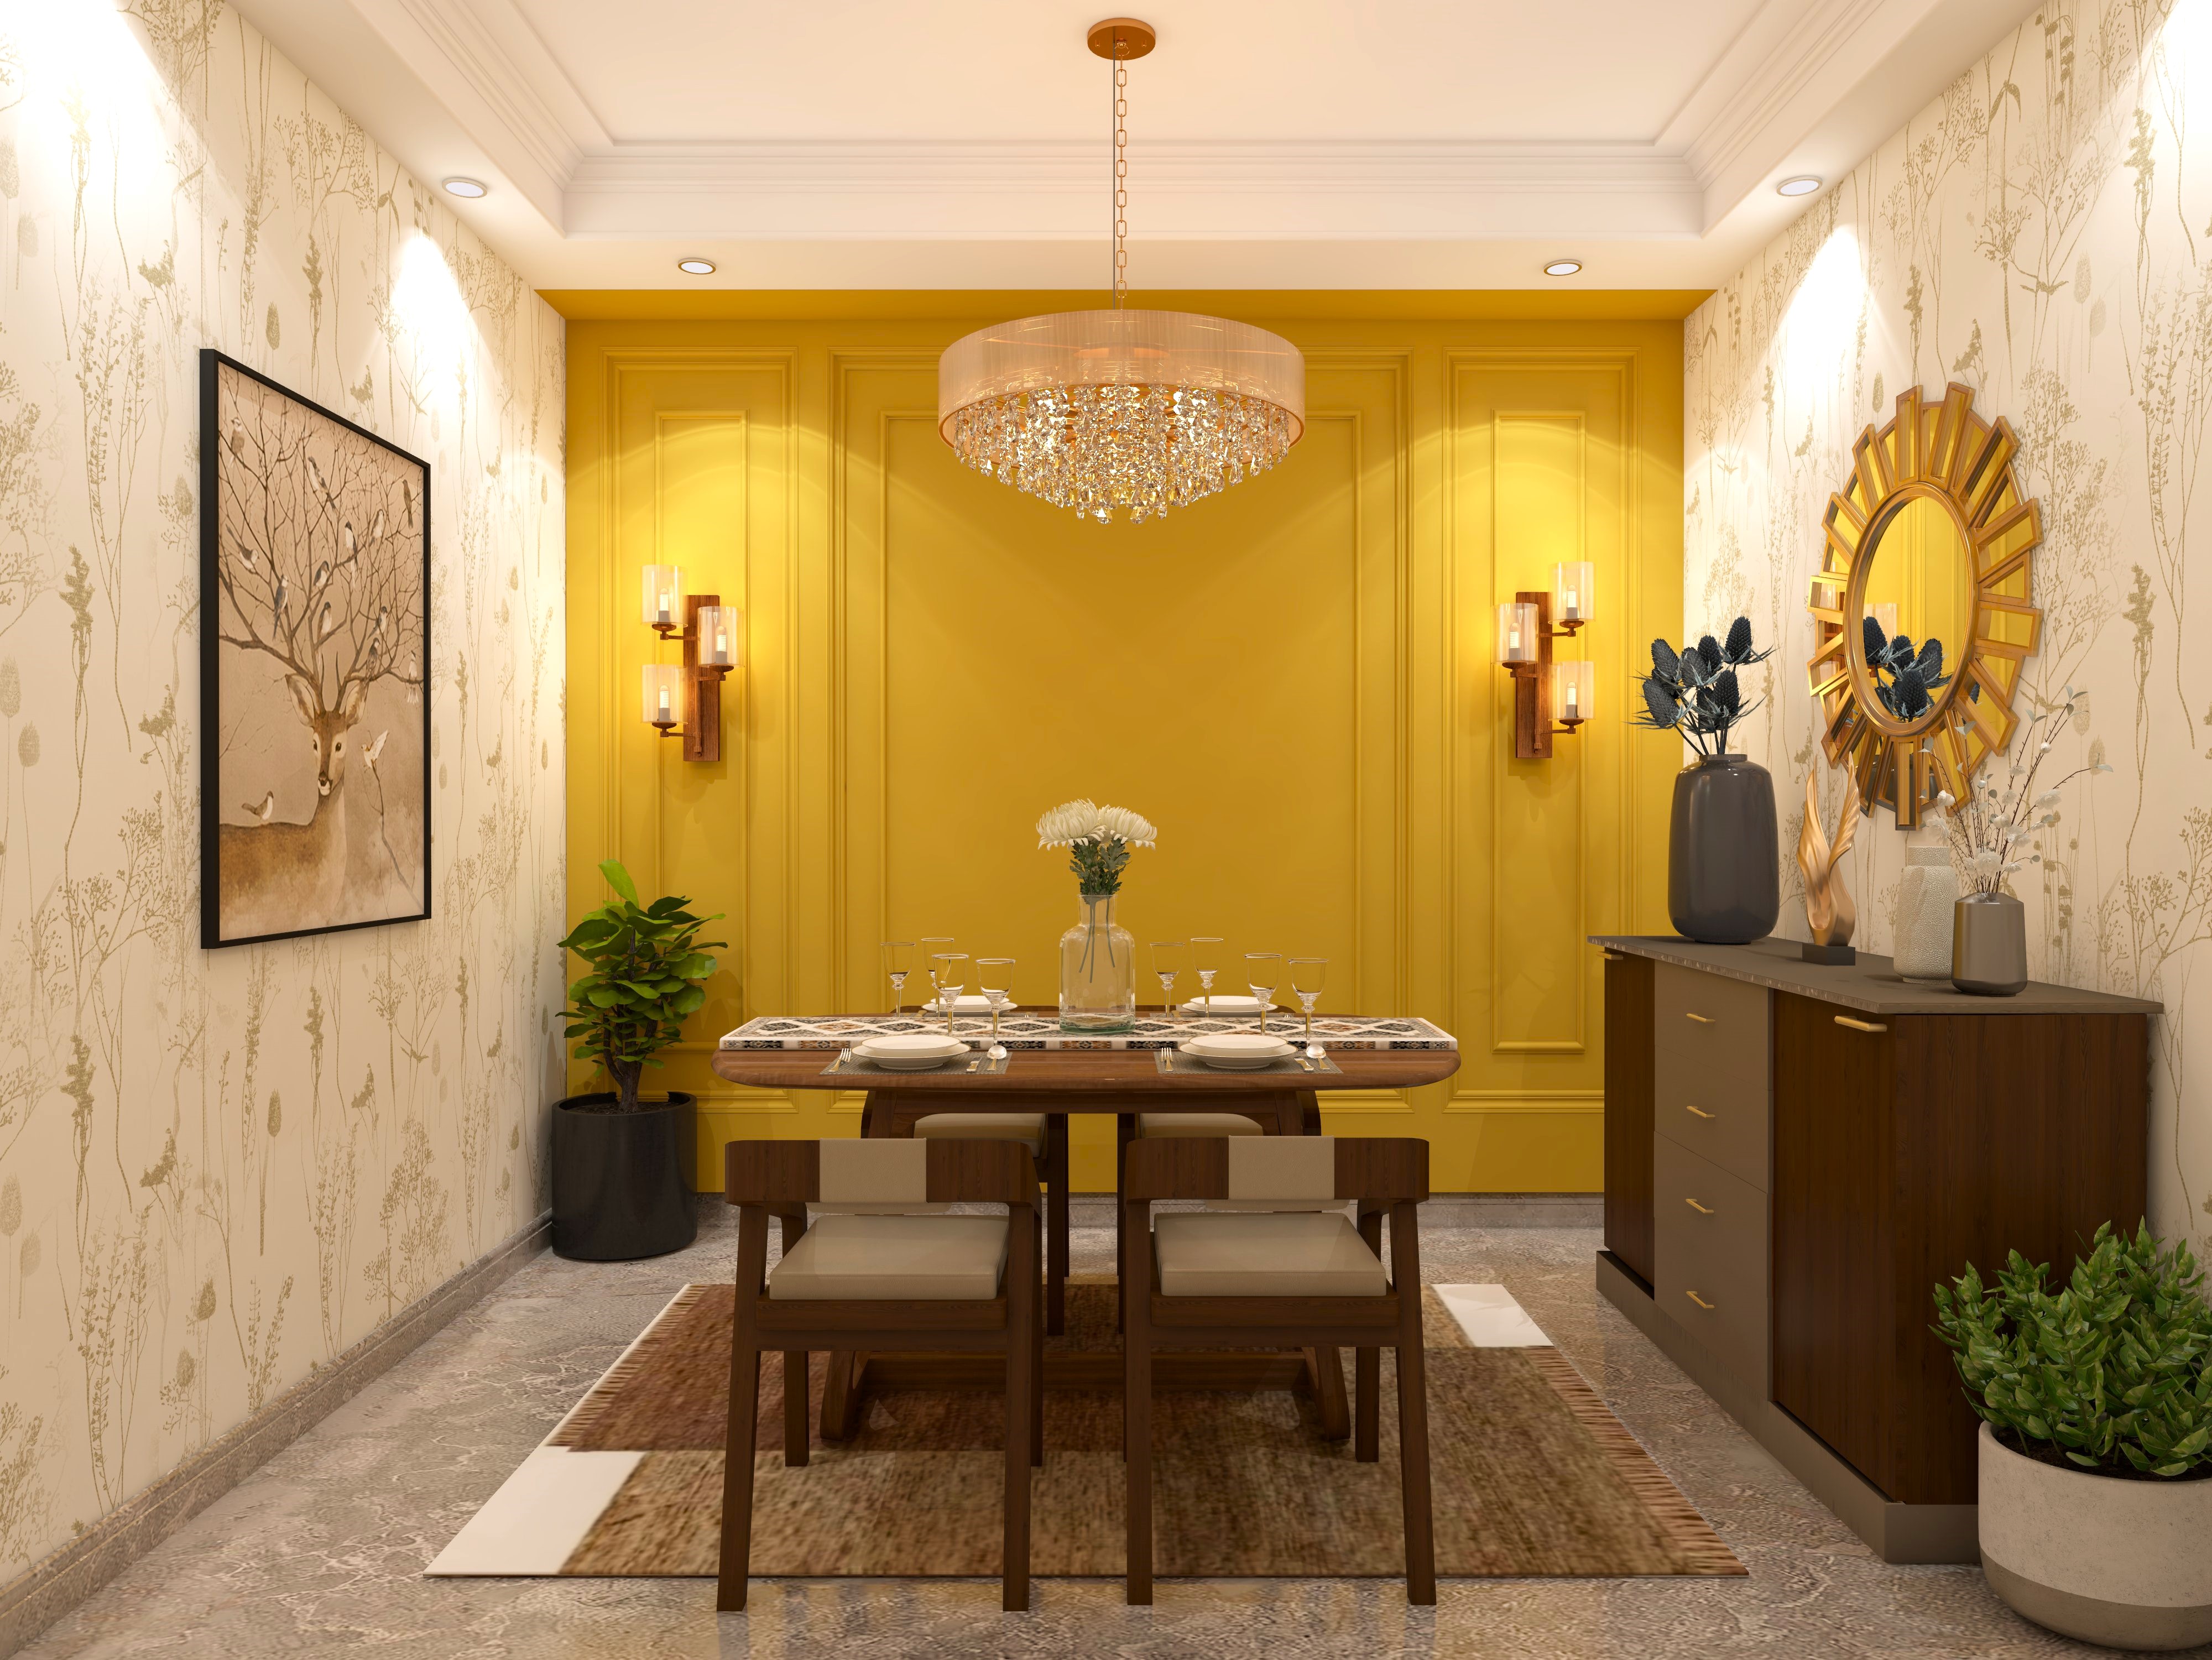 Dining room with wooden console and yellow wall paneling-Beautiful Homes